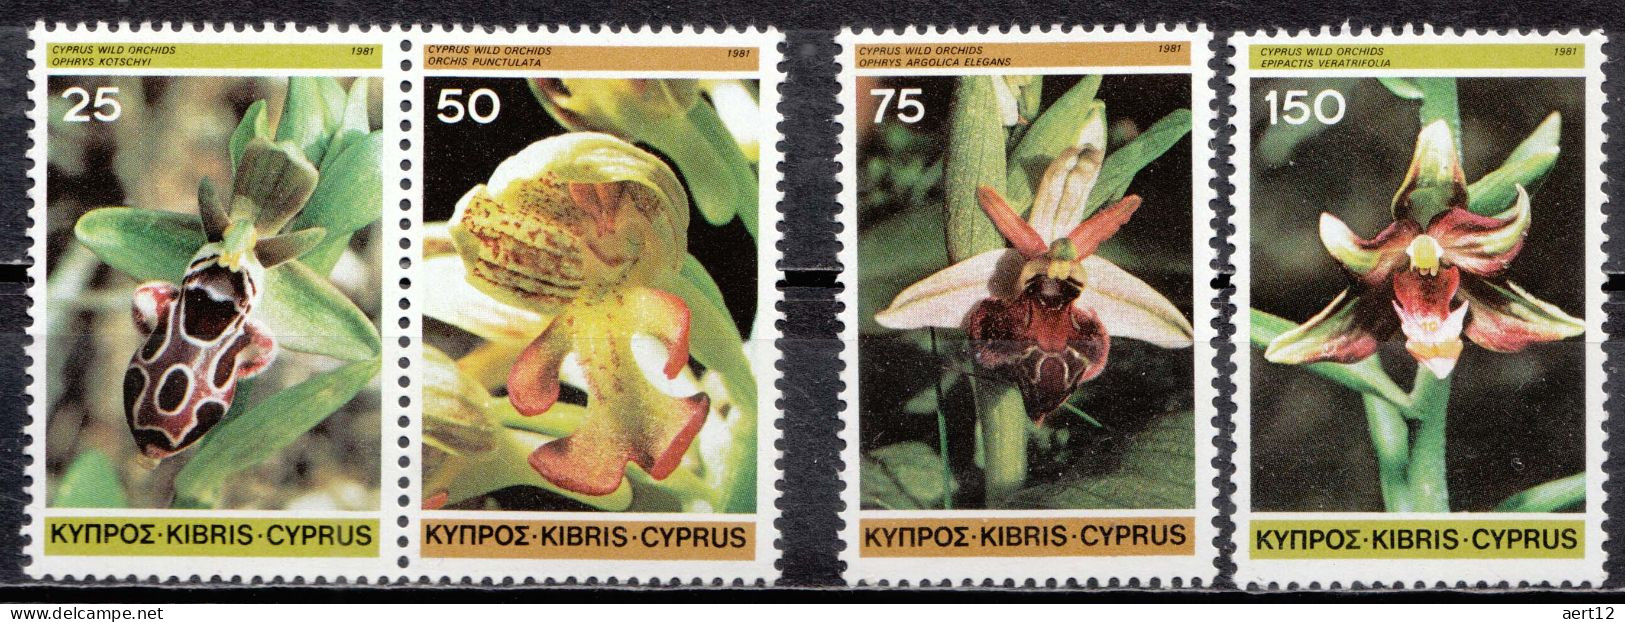 1981, Cyprus, Wild Orchids, Flowers, Orchids, Plants, 4 Stamps, MNH(**), CY 552-55 - Ungebraucht